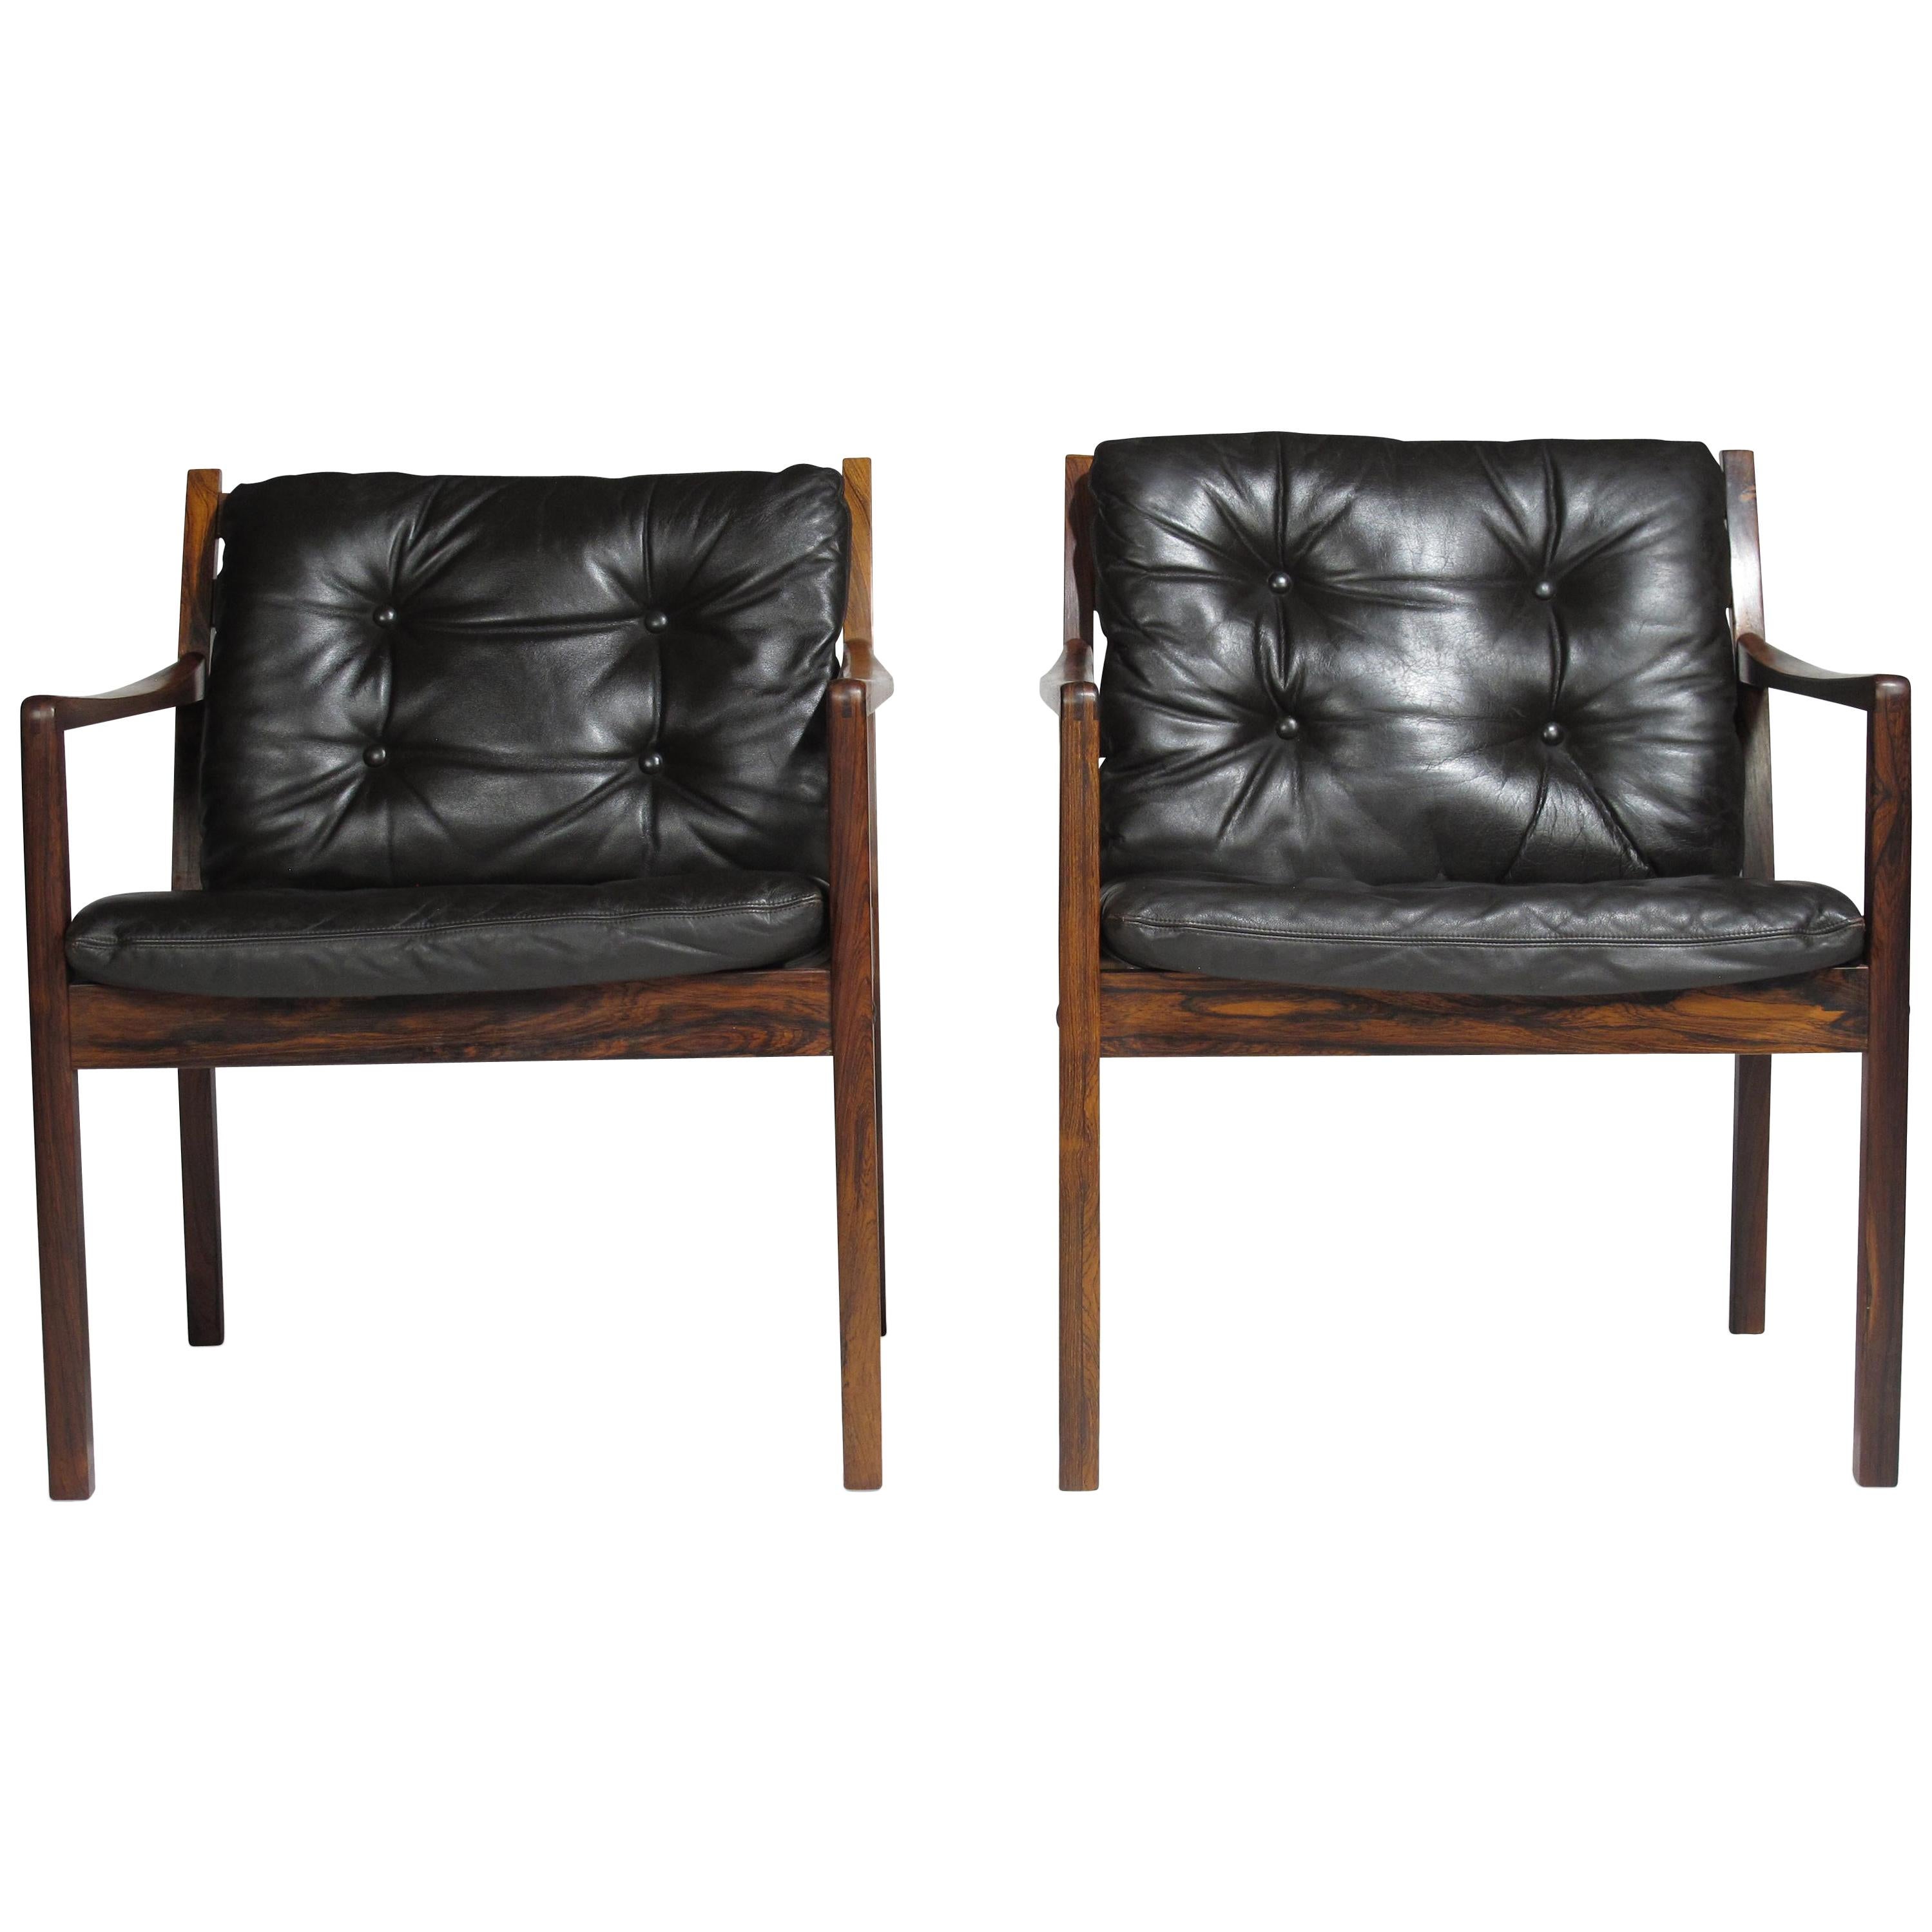 Midcentury Brazilian rosewood lounge chairs attributed to Ole Wanscher. Each lounge chair crafted of rich dynamic grained Brazilian rosewood with exposed joinery in arms, slatted backrest and loose cushions covered in the original black leather with